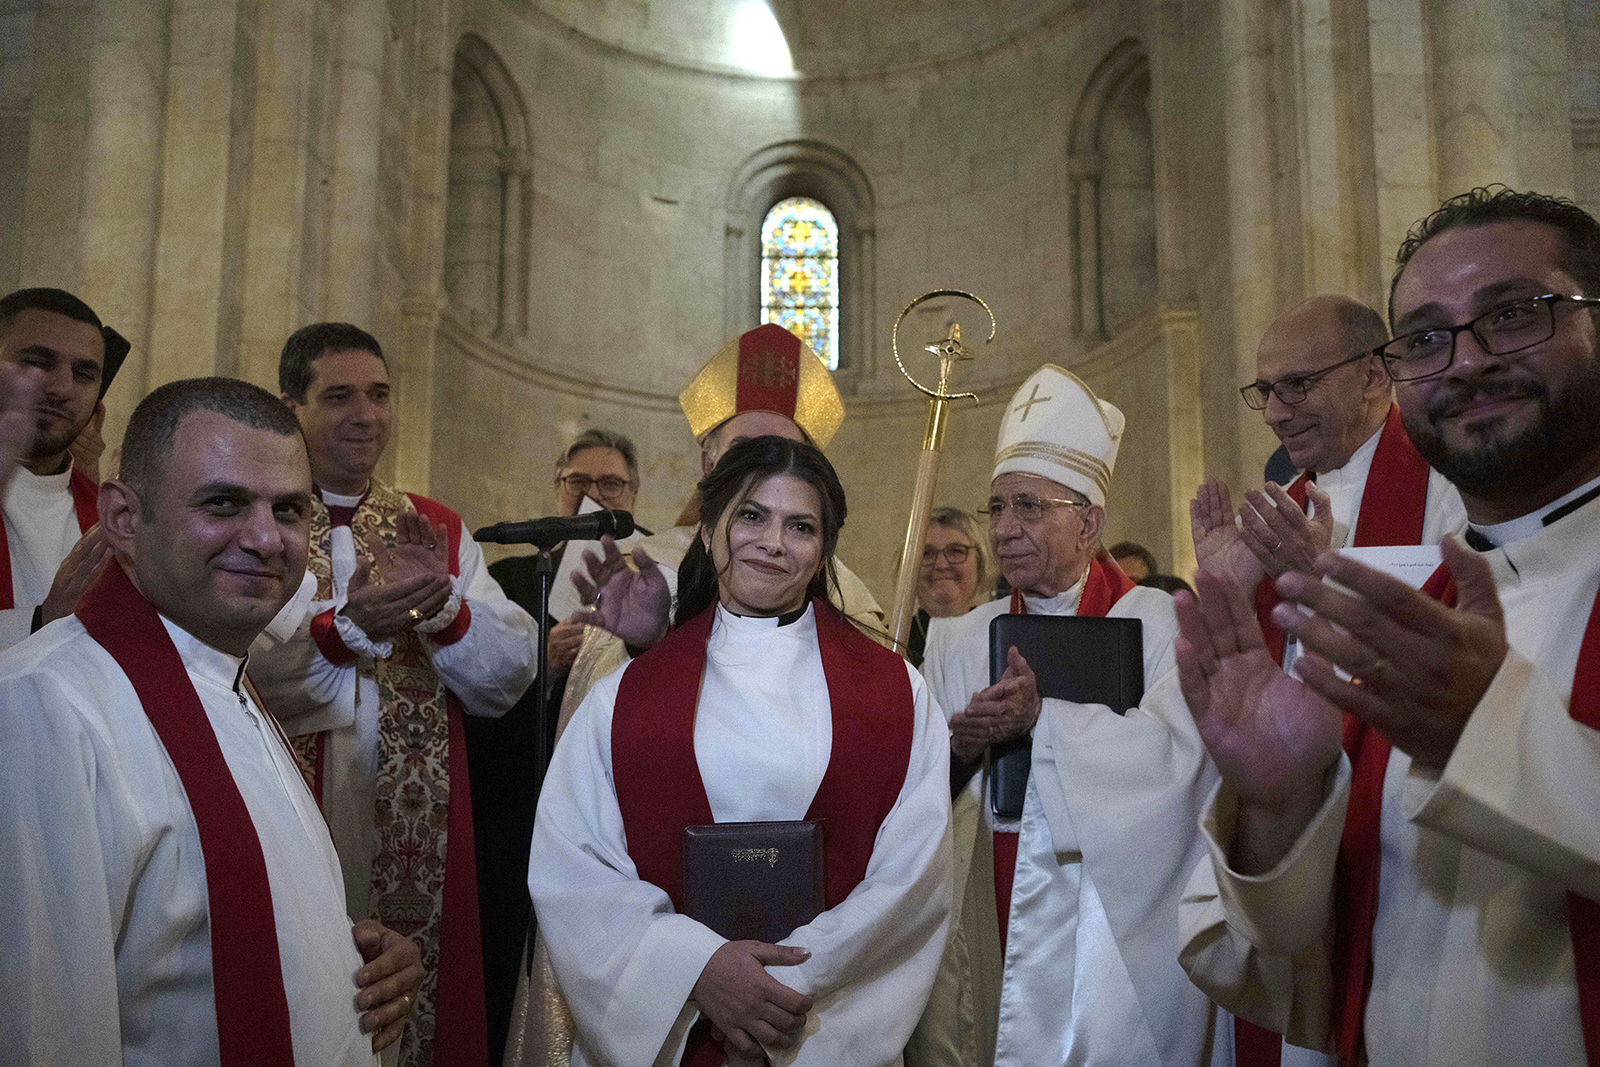 The Rev. Sally Ibrahim Azar, center, a Palestinian Christian and council member of the Lutheran World Federation, is applauded by clergy after she was ordained as the first female pastor in the Holy Land, in the Old City of Jerusalem, Jan. 22, 2023. (AP Photo/Maya Alleruzzo)